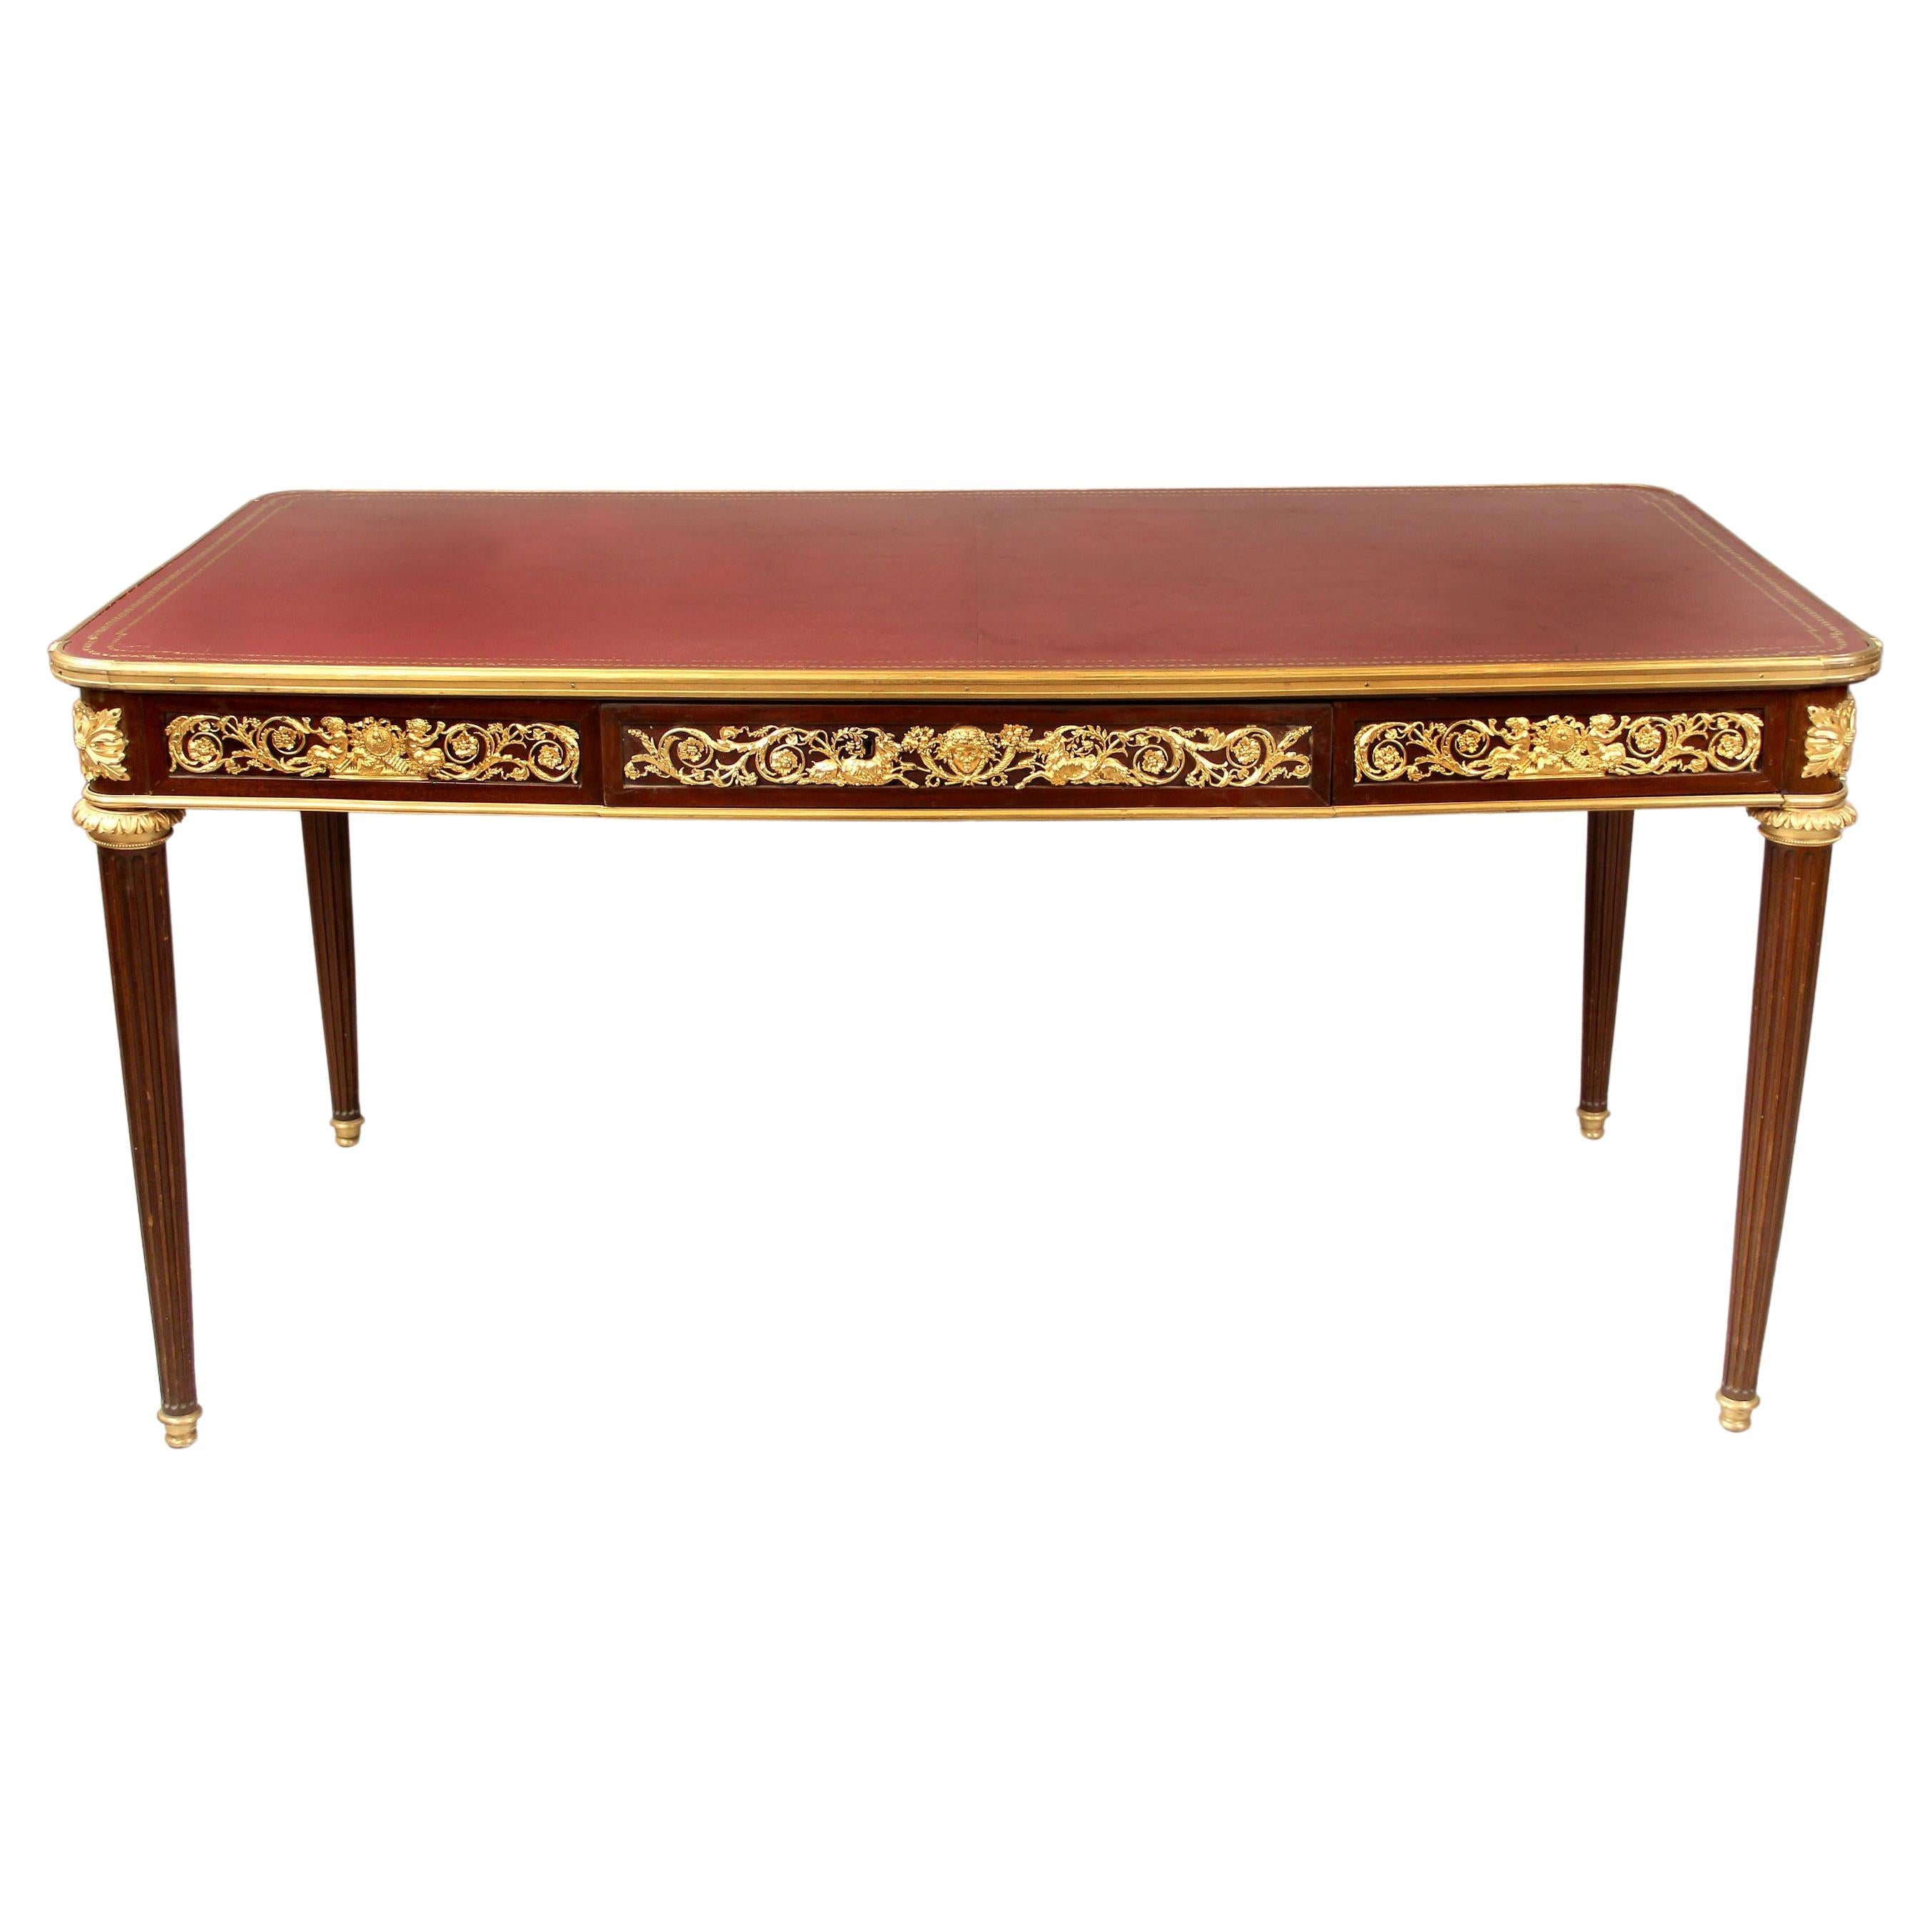 A Wonderful Late 19th Century Gilt Bronze Mounted Louis XVI Style Desk For Sale